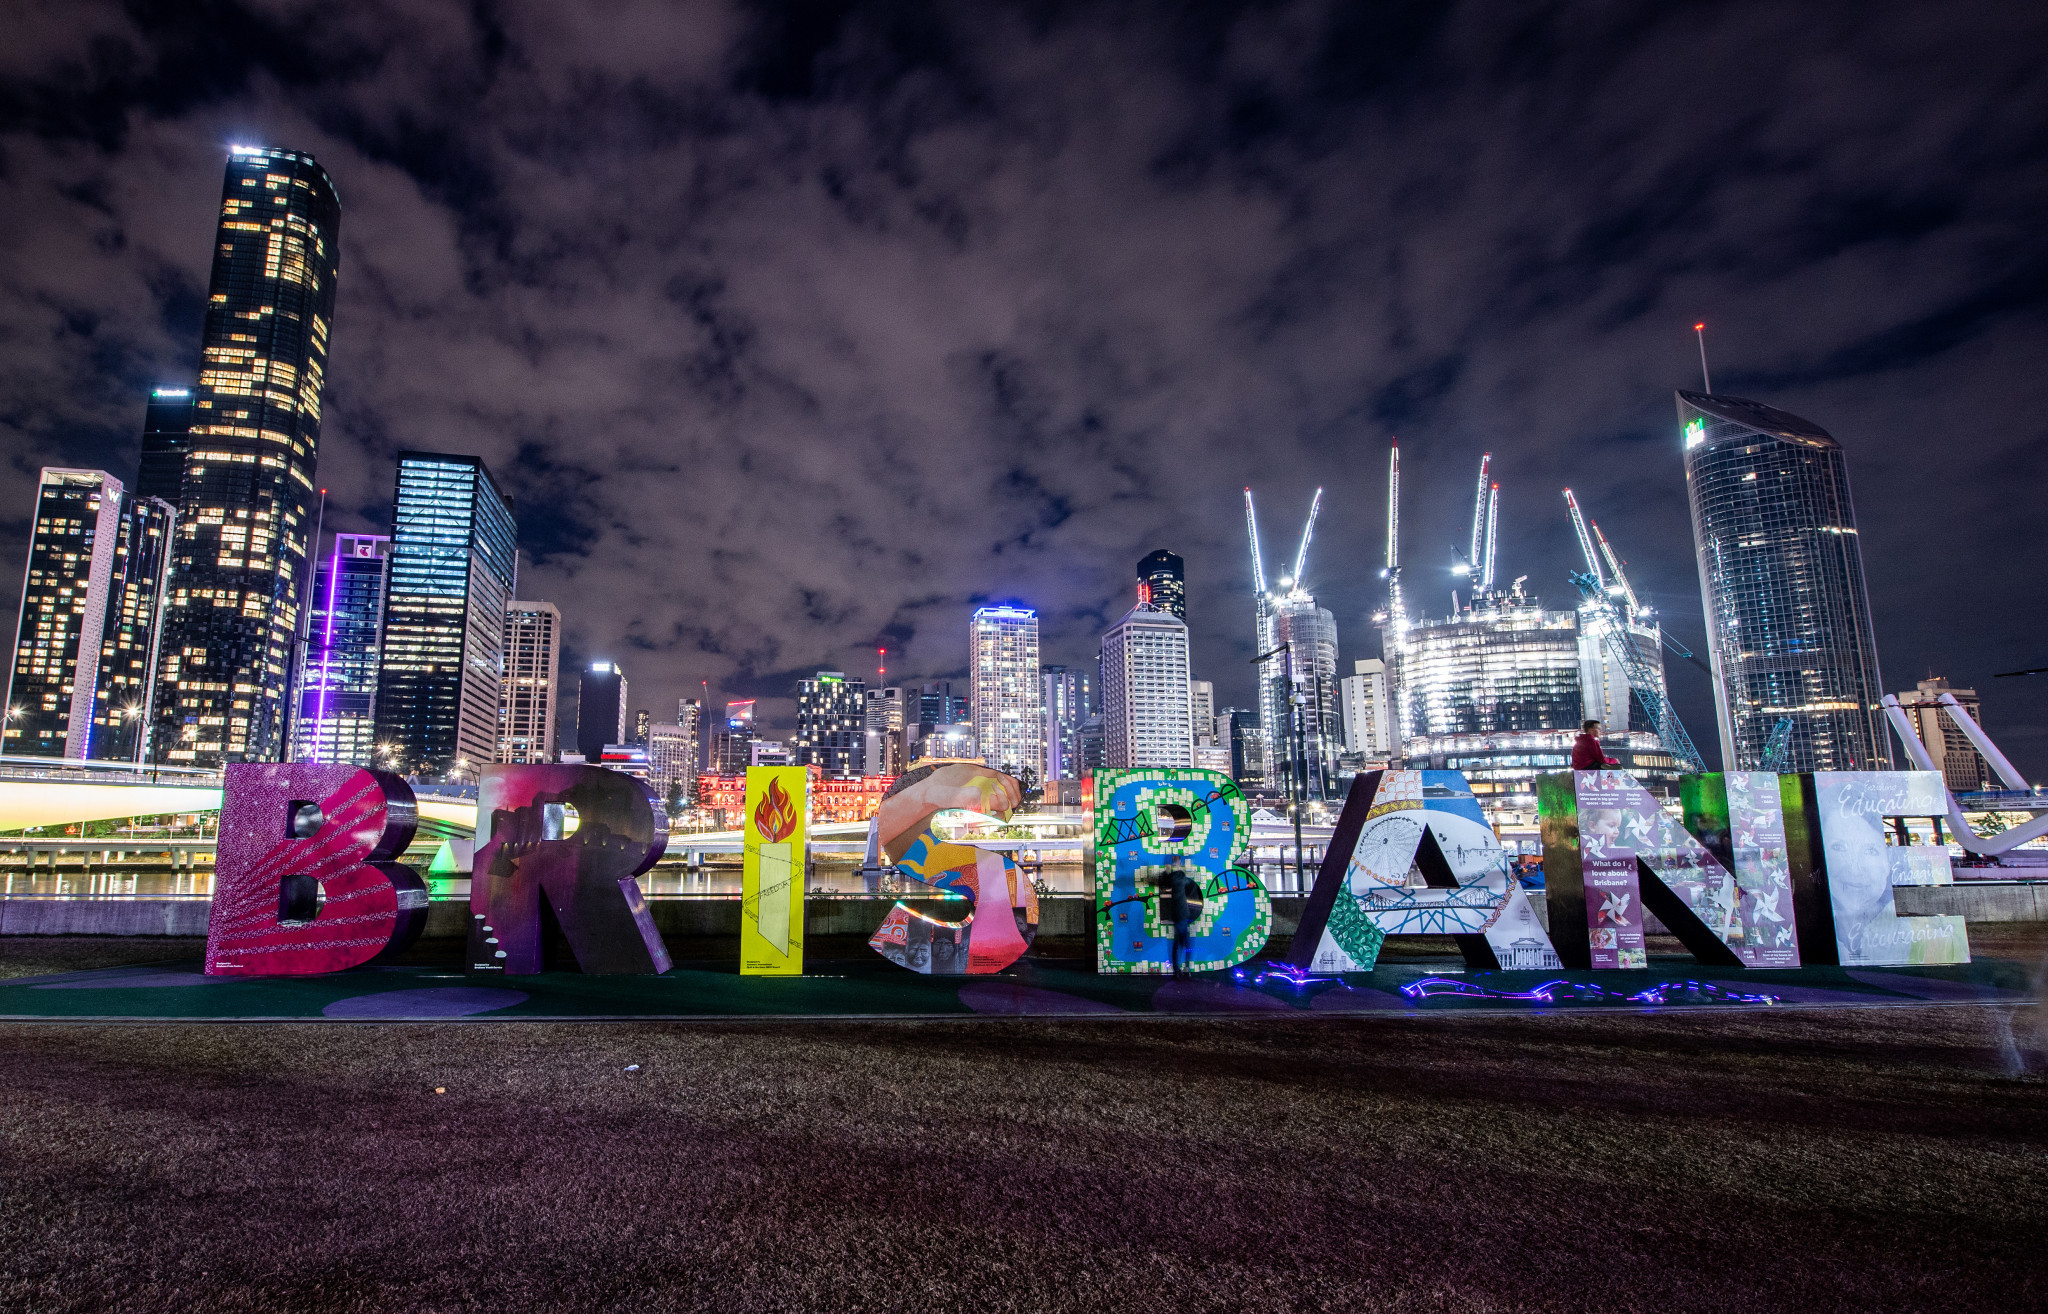 Brisbane 2032 is looking for firms to work on delivering the brand designs for the Olympic Games ©Getty Images